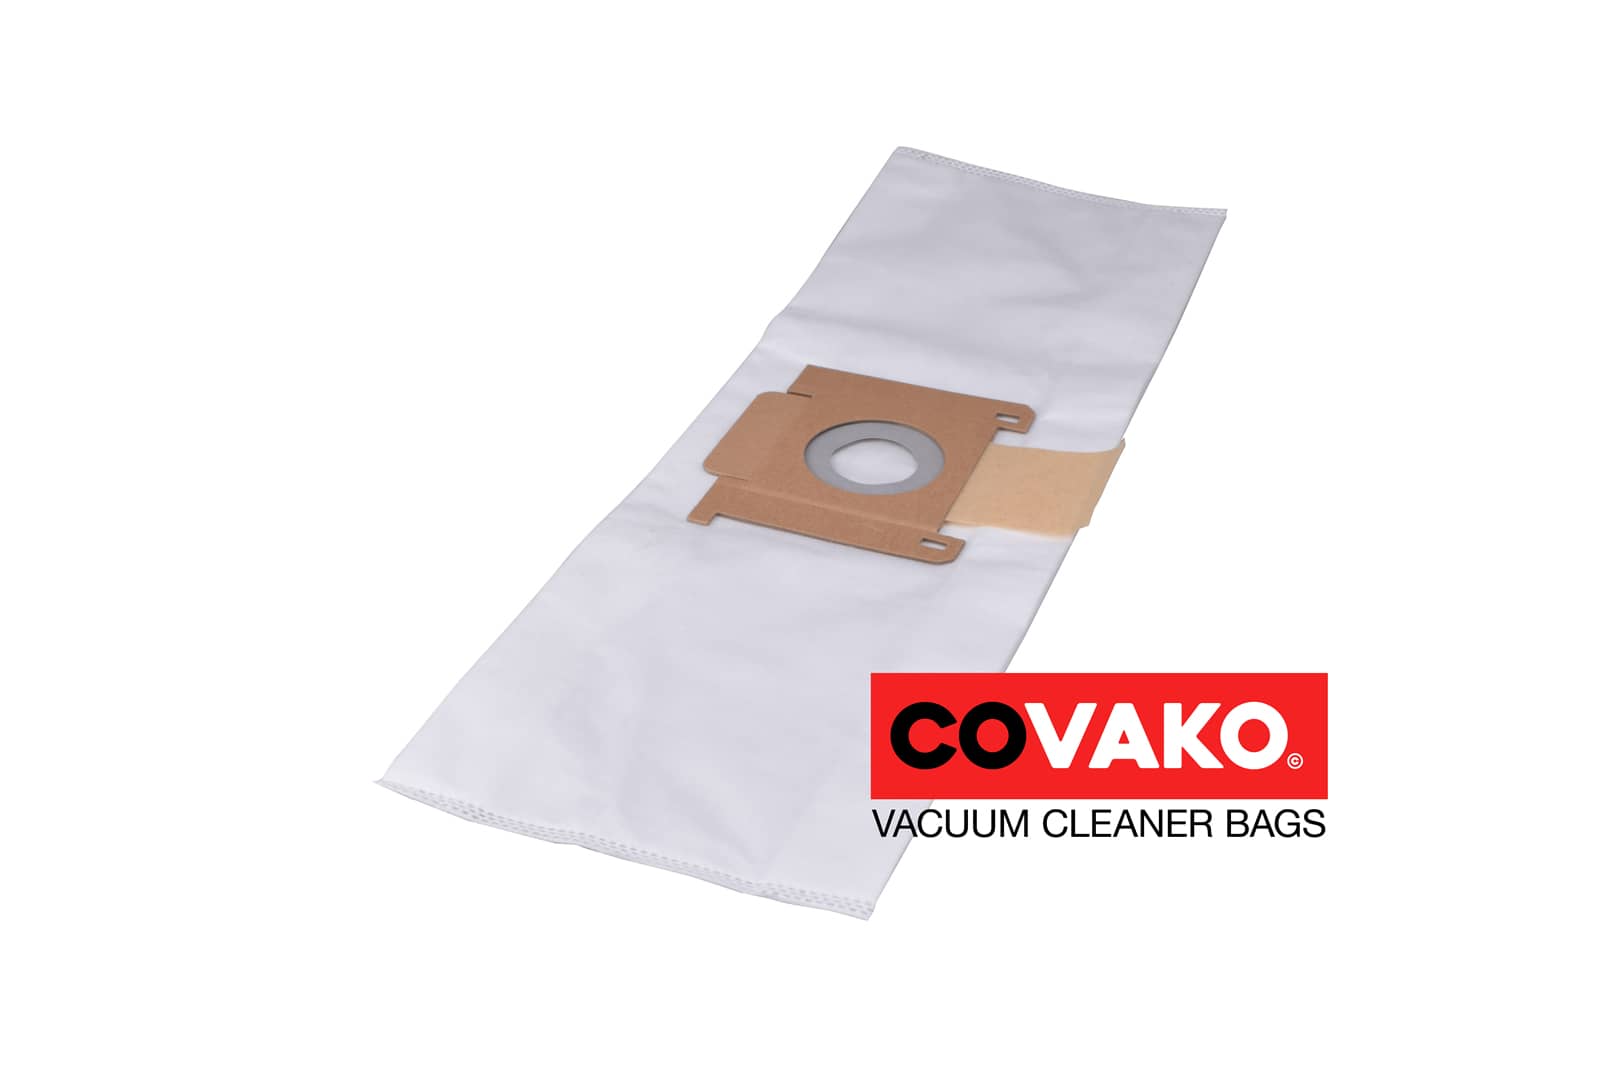 Ivac Hi-Filtration 6.0 Save / Synthesis - Ivac vacuum cleaner bags